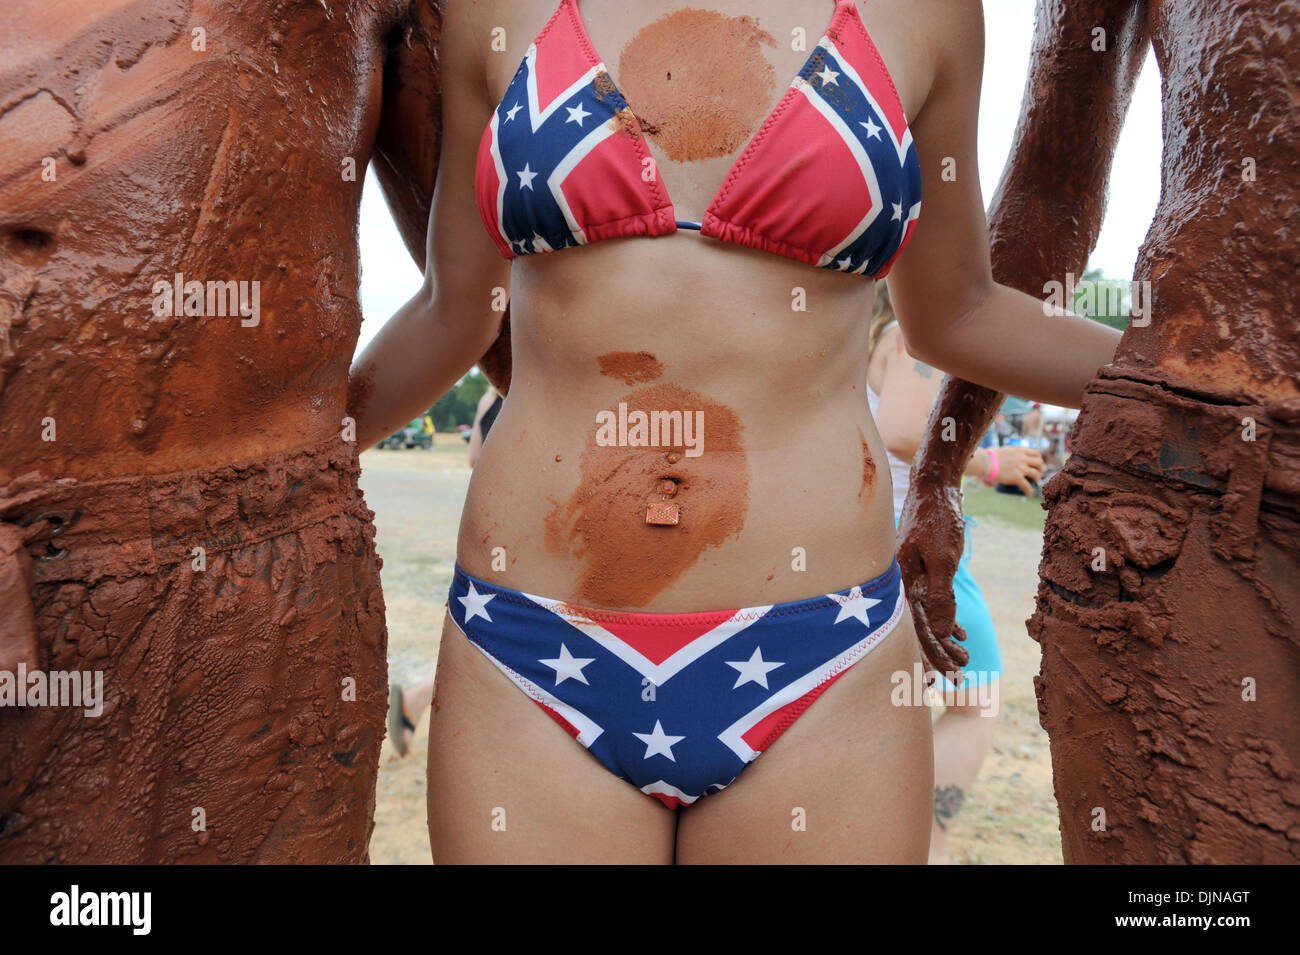 Mar 11, 2008 - East Dublin, Georgia, USA - Megan Lever sports a Confederate Battle Flag navel ring and bikini while attending the 13th annual Summer Redneck Games at Buckeye Park in East Dublin, Georgia, on Saturday. The annual homage to Southerners, began as a spoof to the 1996 Summer Olympics in Atlanta. Thousands of revelers attend the event whose events include bobbing for pigs Stock Photo